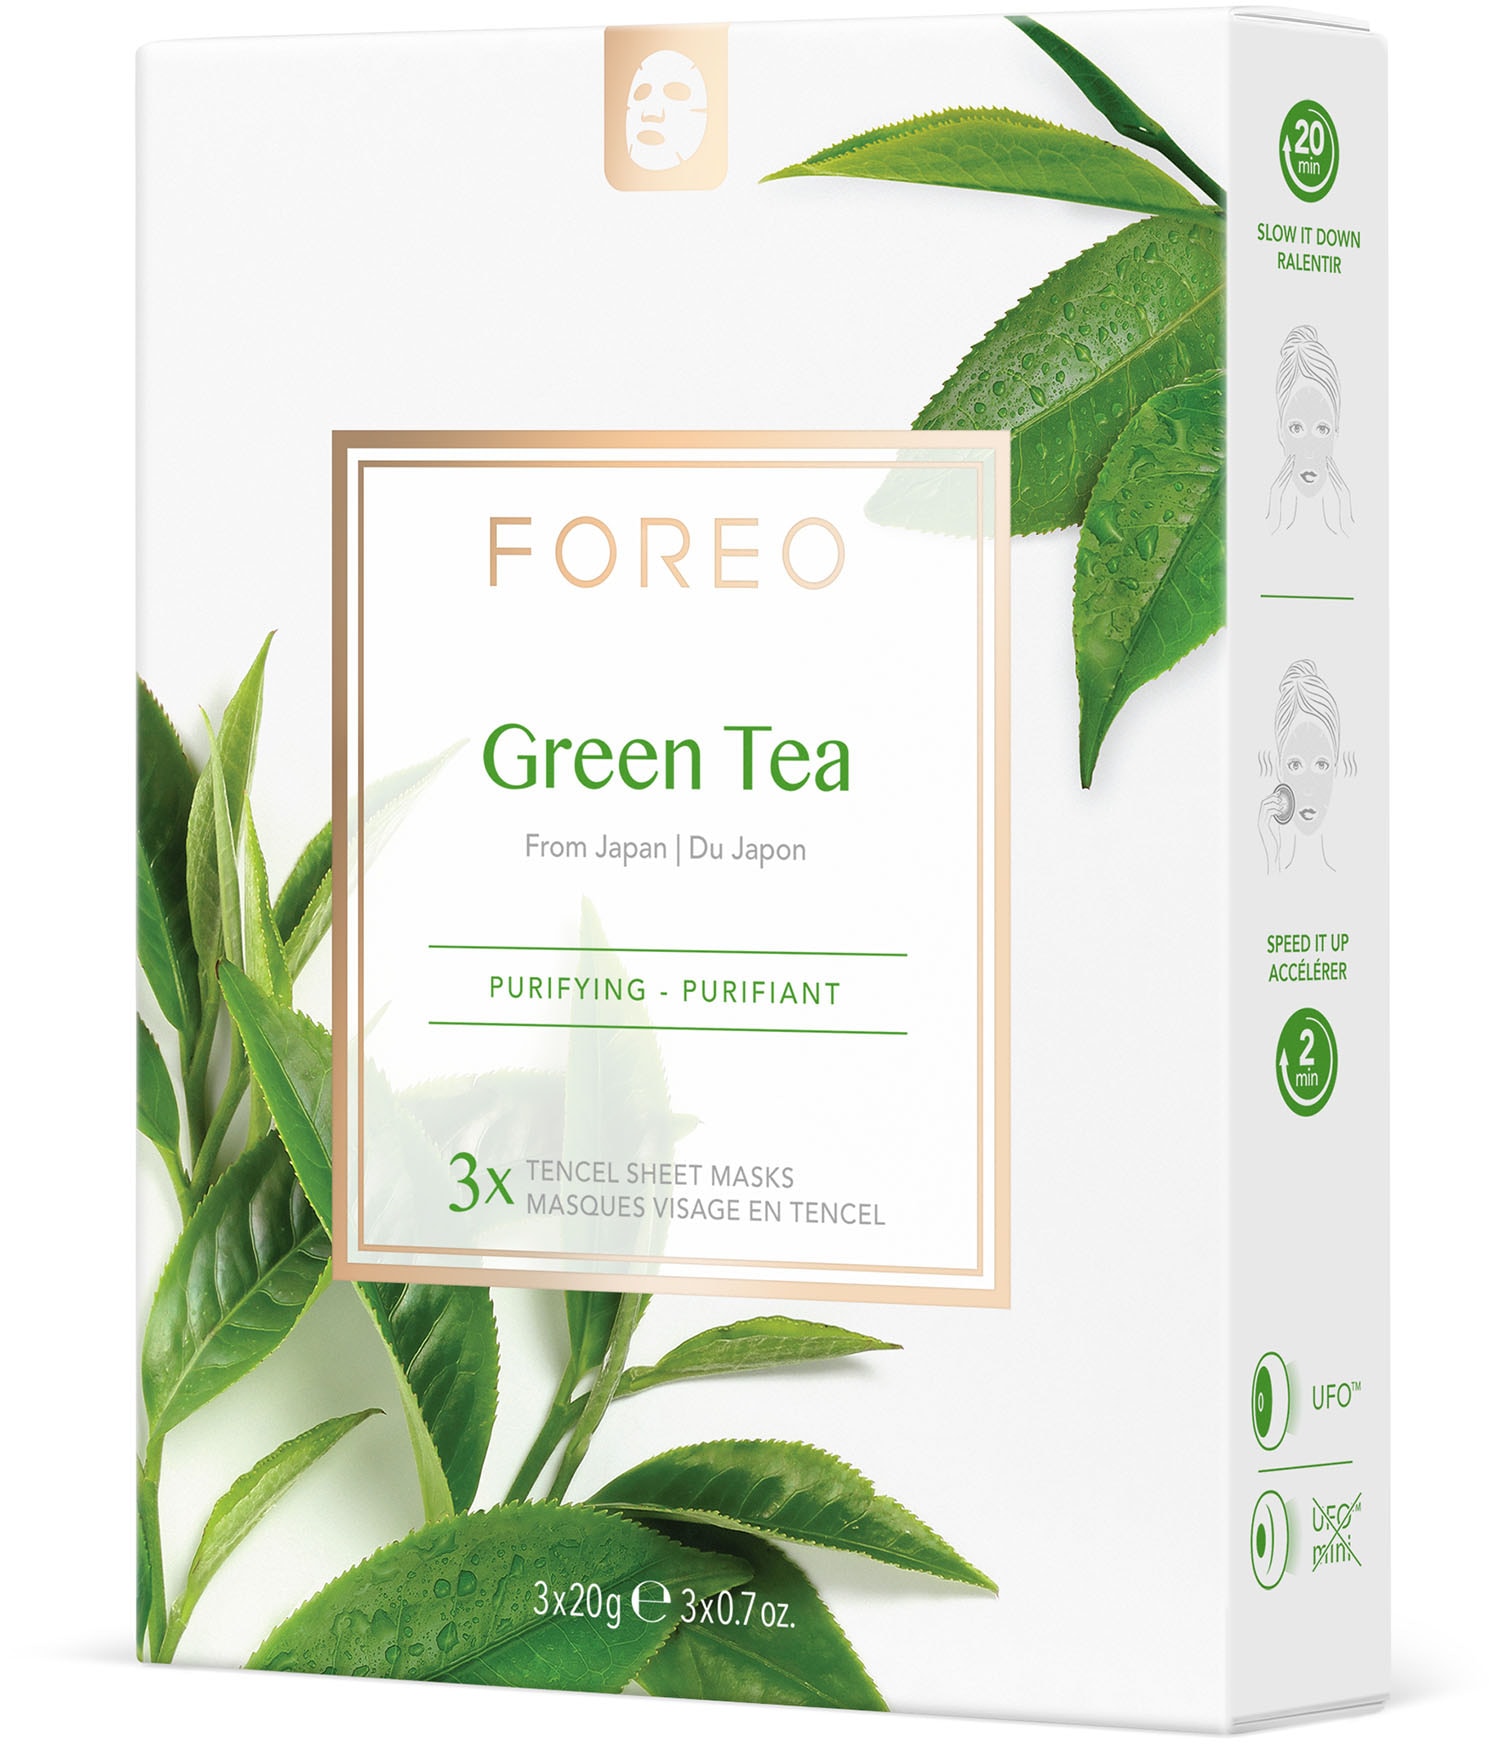 Tea« Green »Farm Sheet Face Collection Masks bei To OTTOversand FOREO Gesichtsmaske